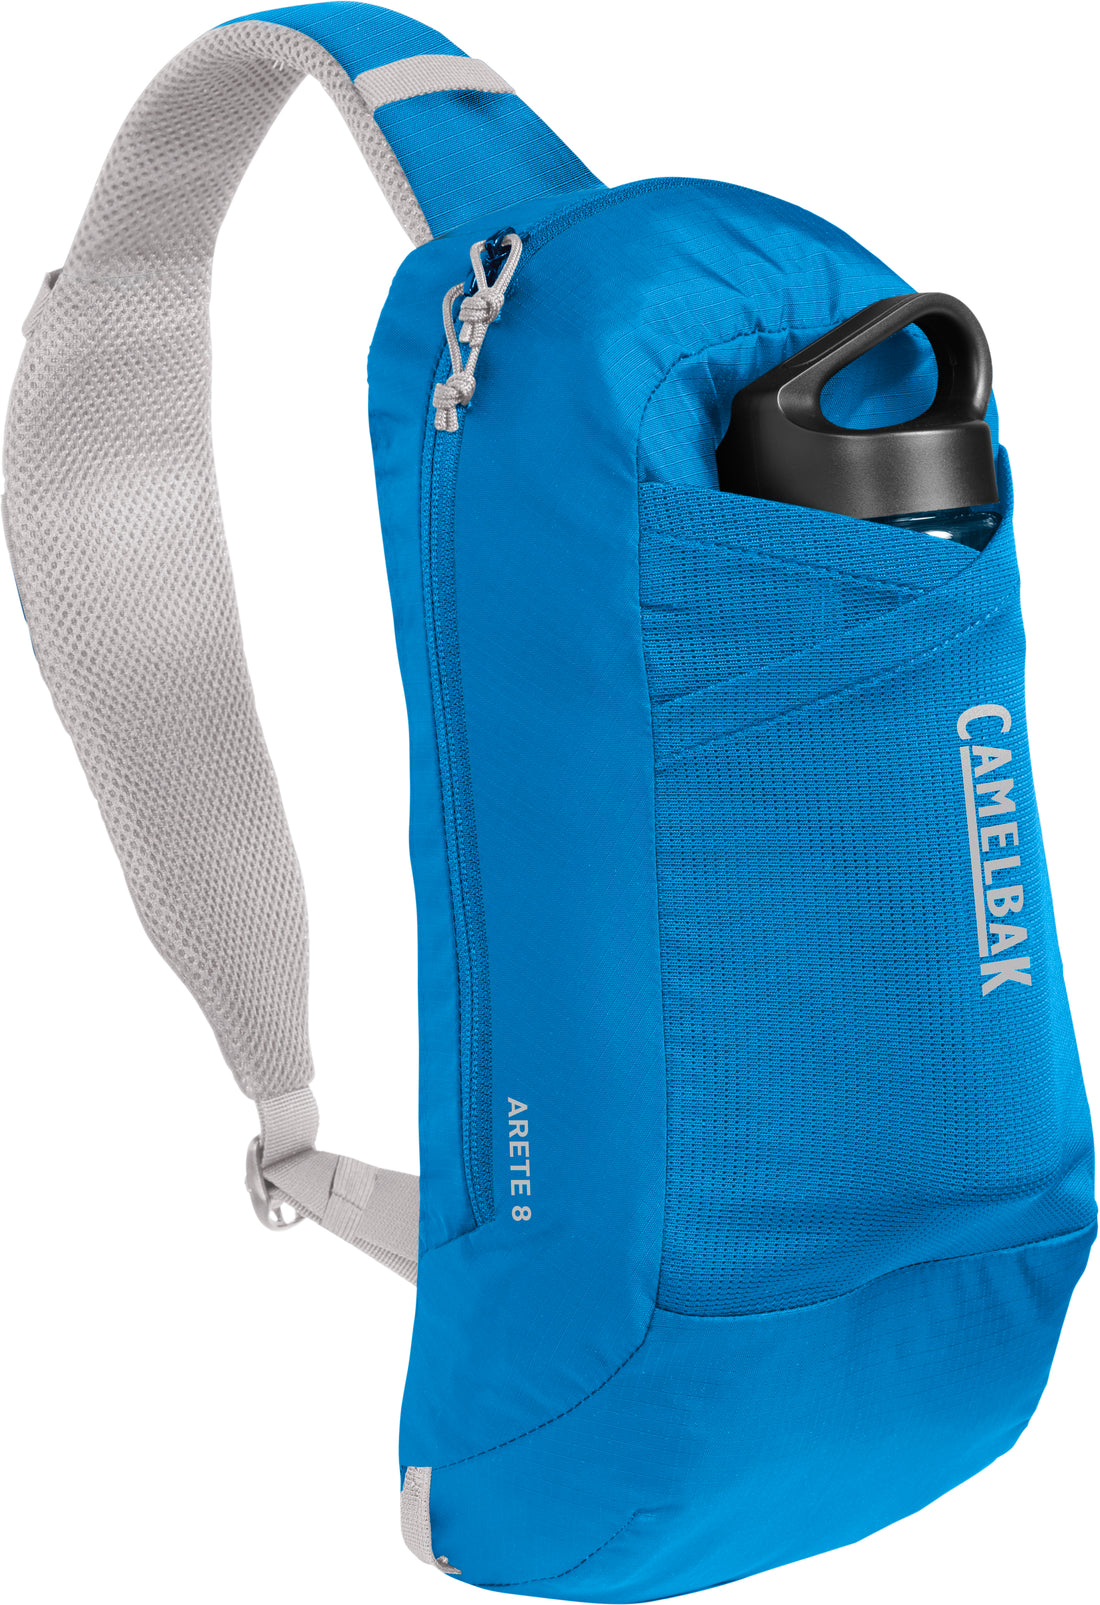 Camelbak|ARETE_SLING|Cycle_LM